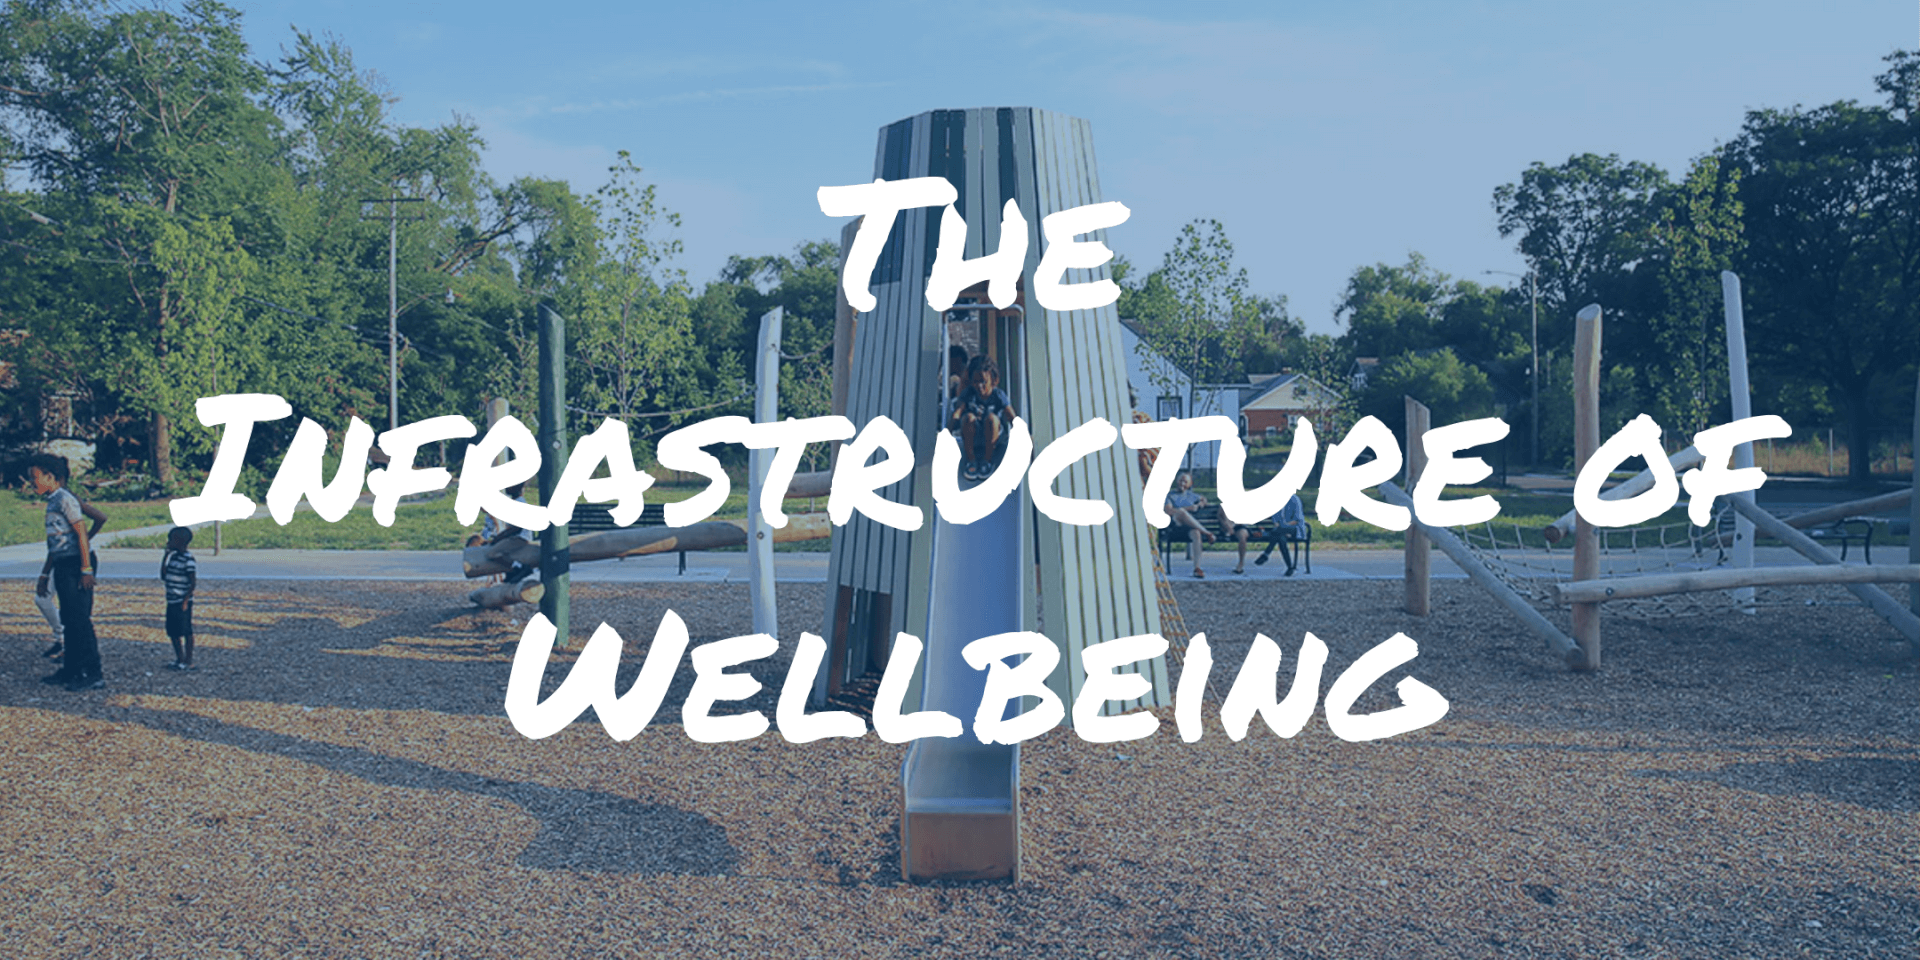 https://wellbeingblueprint.org/wp-content/uploads/2022/01/Infrastructure_Wellbeing.png